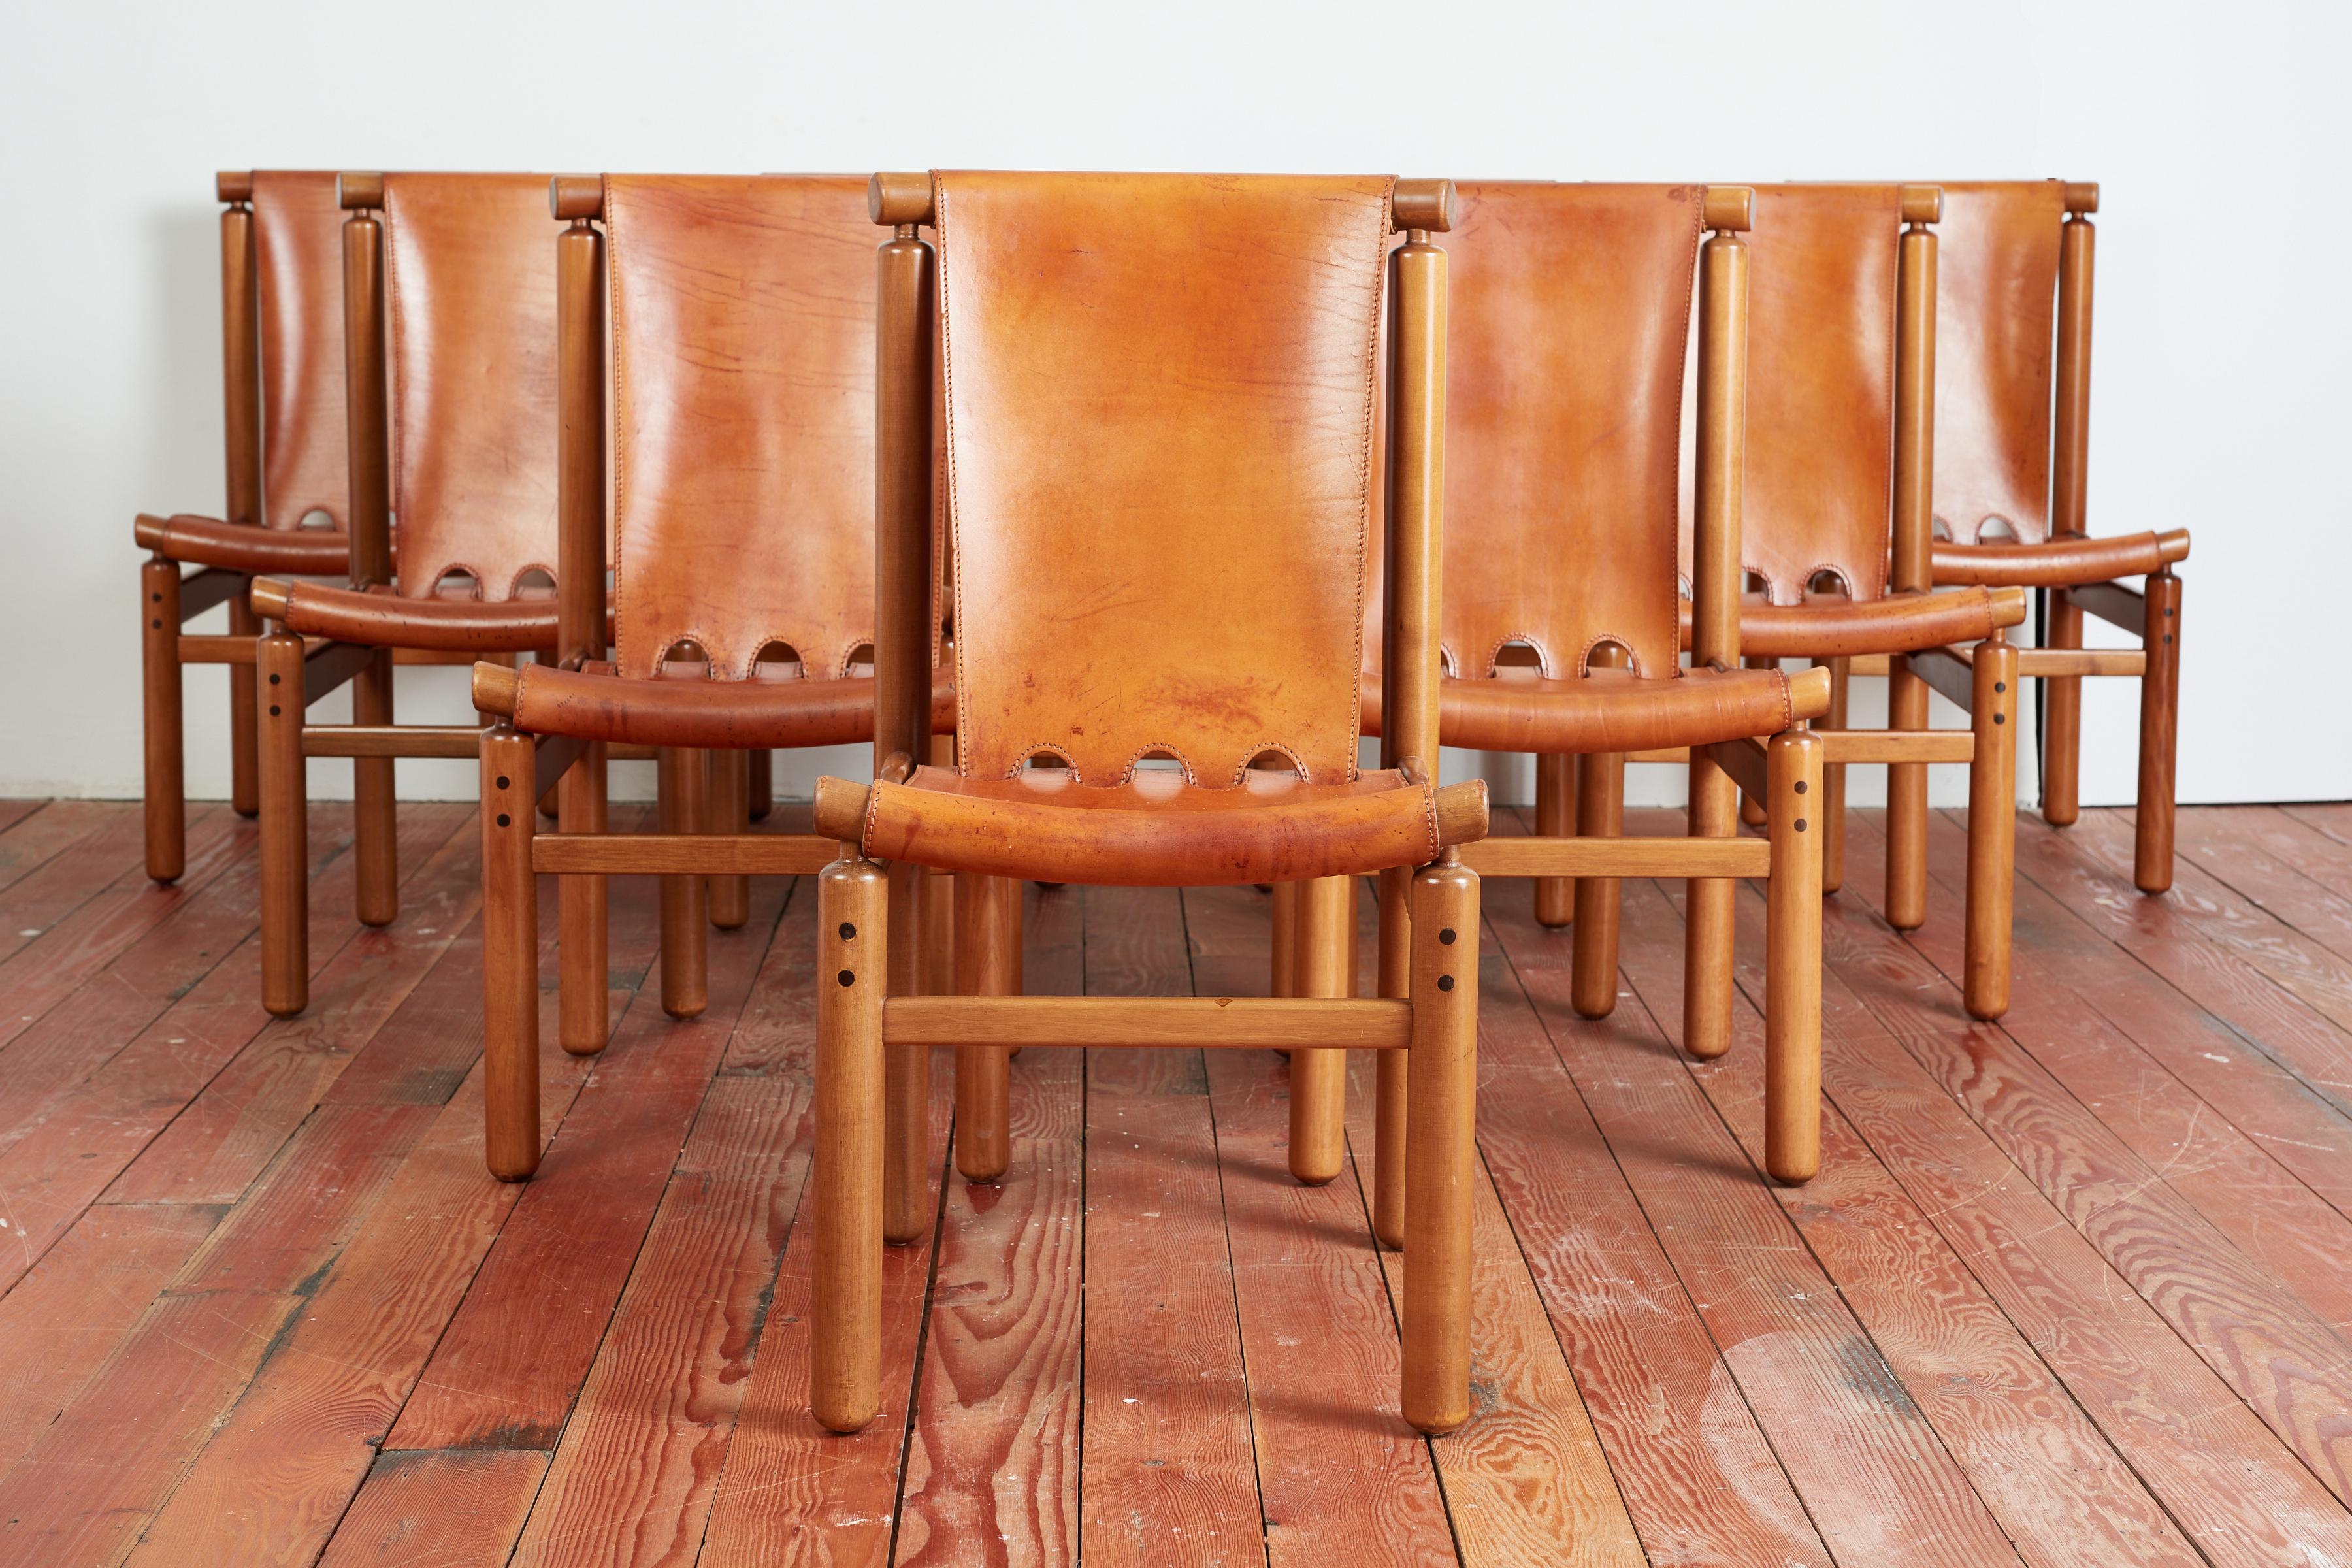 Incredible rare set of 10 leather Italian dining chairs by Ilmari Tapiovaara for La Permanente Mobili Cantù, circa 1950s.
Wonderful thick saddle leather with great patina'd leather on solid beech wood frames with cylinder shape. 
Cognac leather has